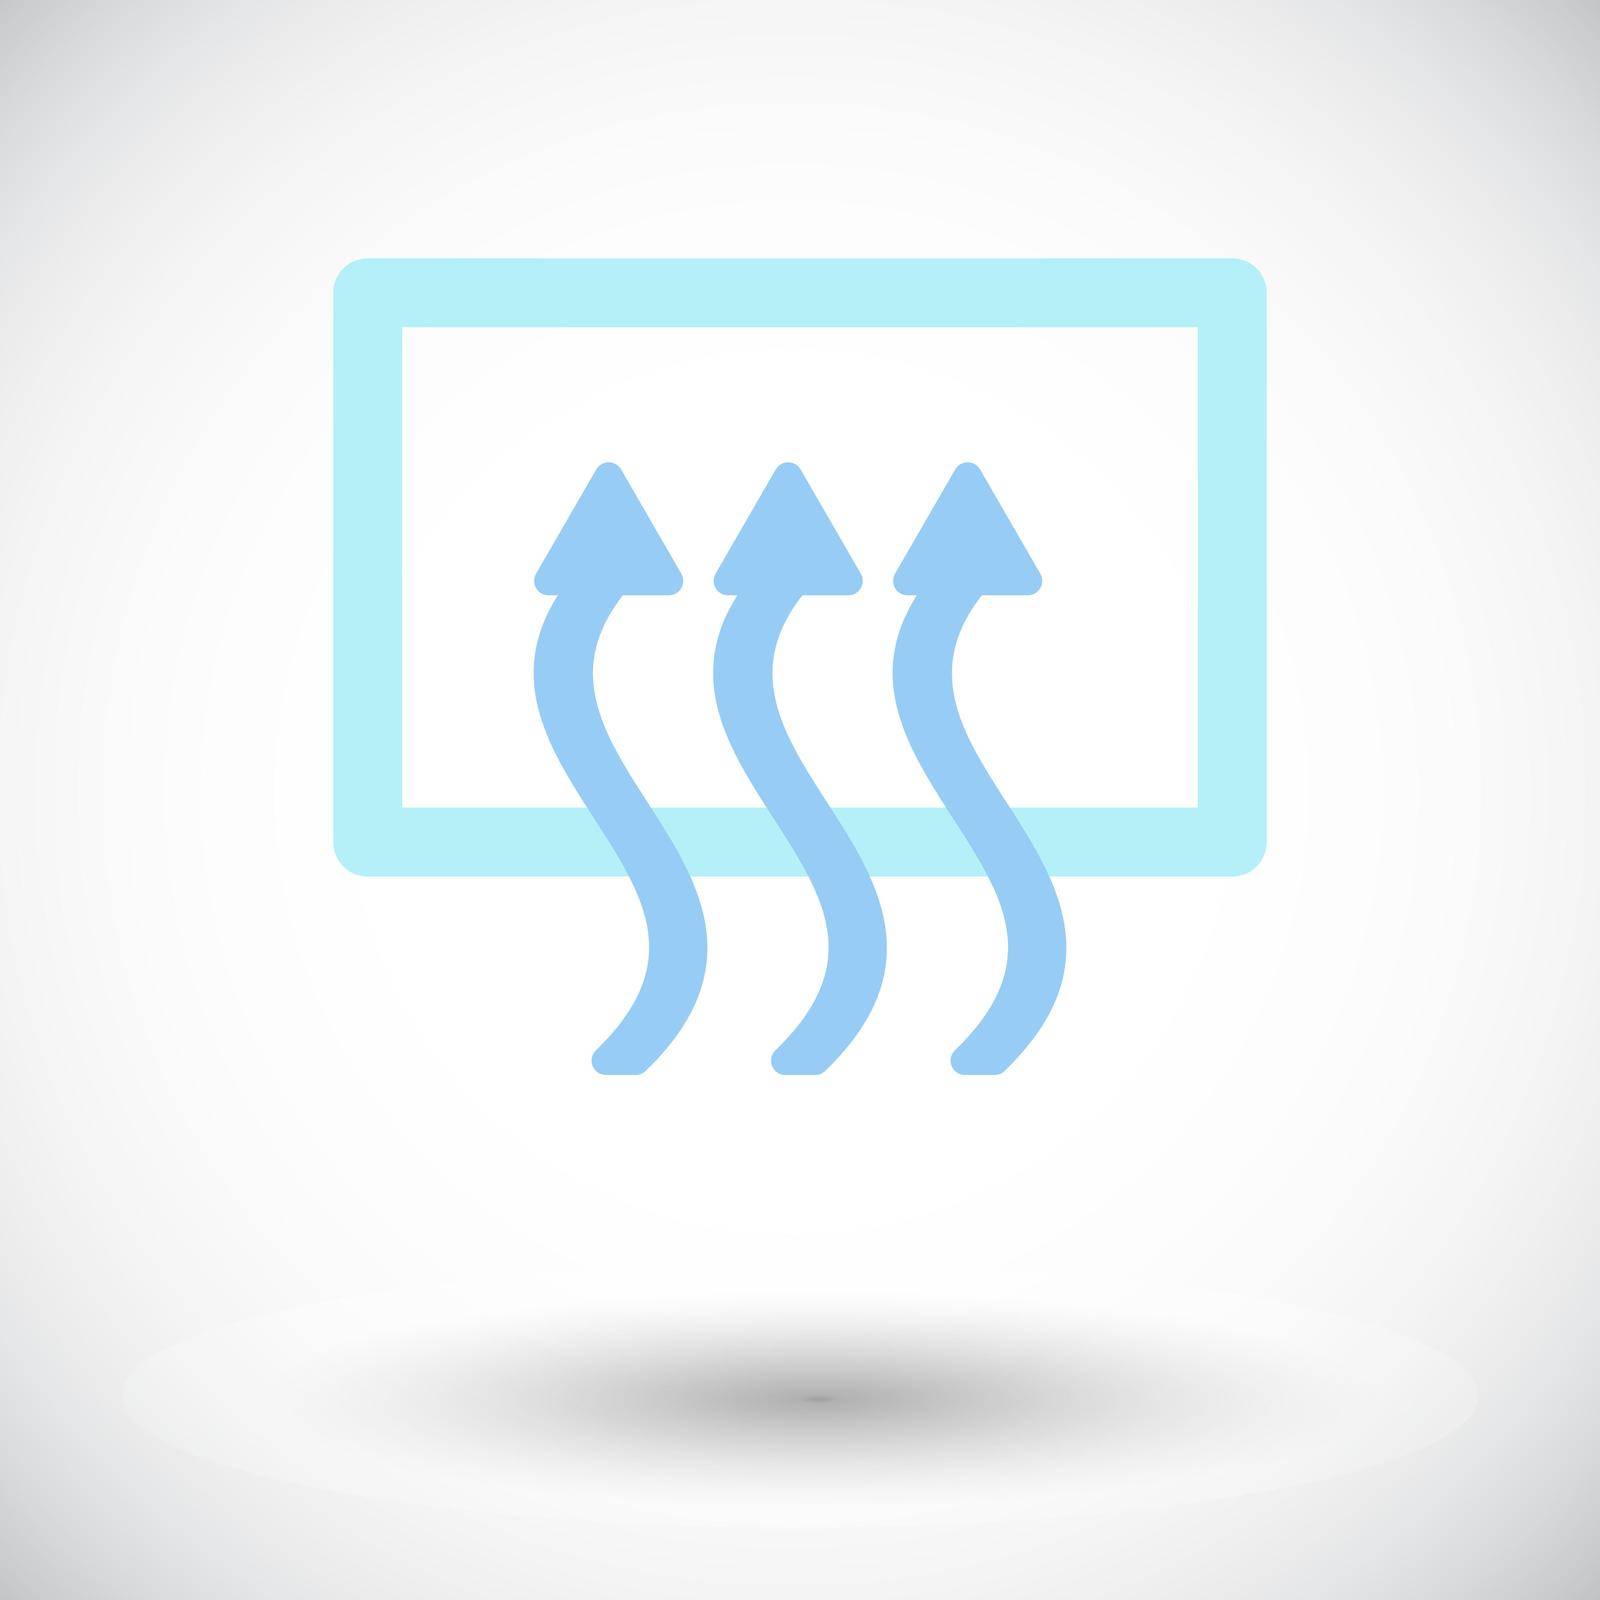 Rear window defrost. Single flat icon on white background. Vector illustration.